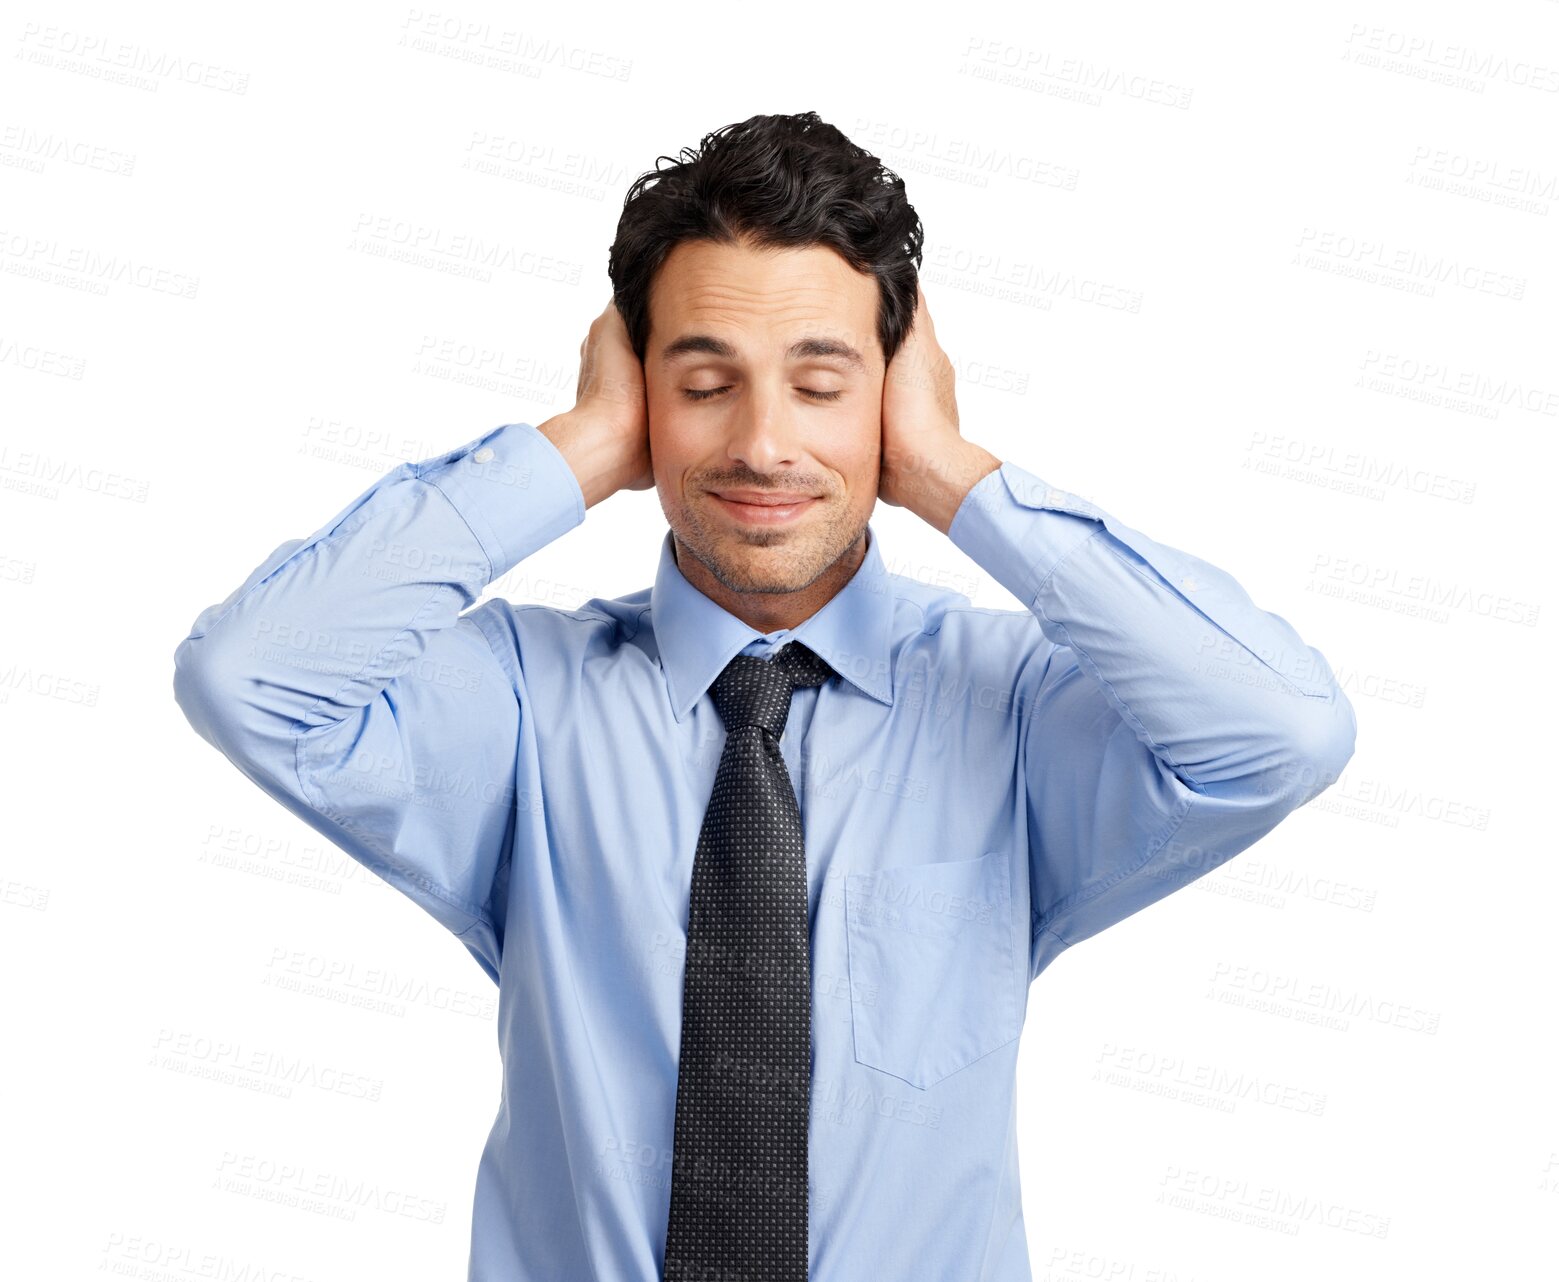 Buy stock photo Silence, business man and cover ears isolated on a transparent png background. Peace, calm and male person covering ear for loud sound, blocking noise and enjoying quiet, relax and zen meditation.